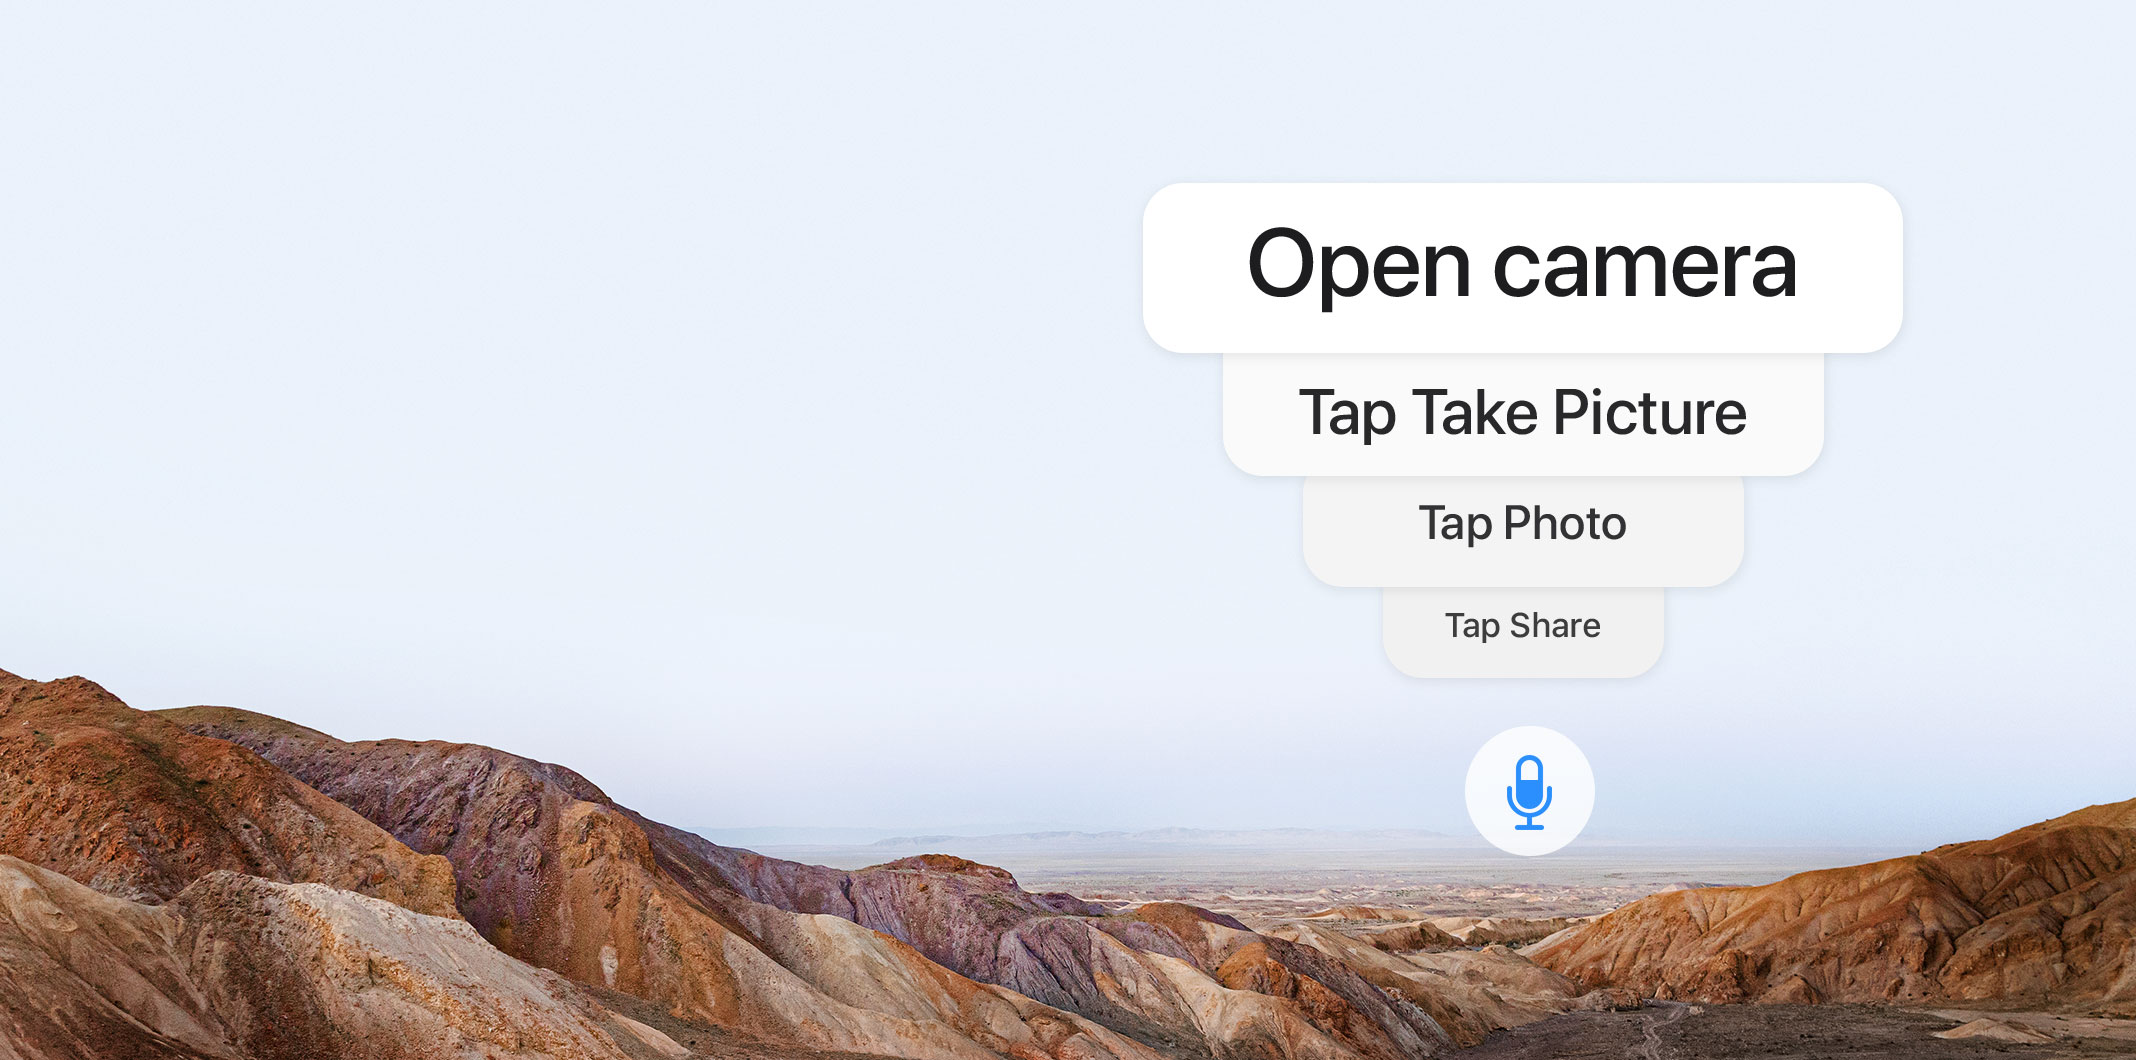 Sequence of Voice Control commands — Open Camera, Tap Take Picture, Tap Photo, Tap Share.